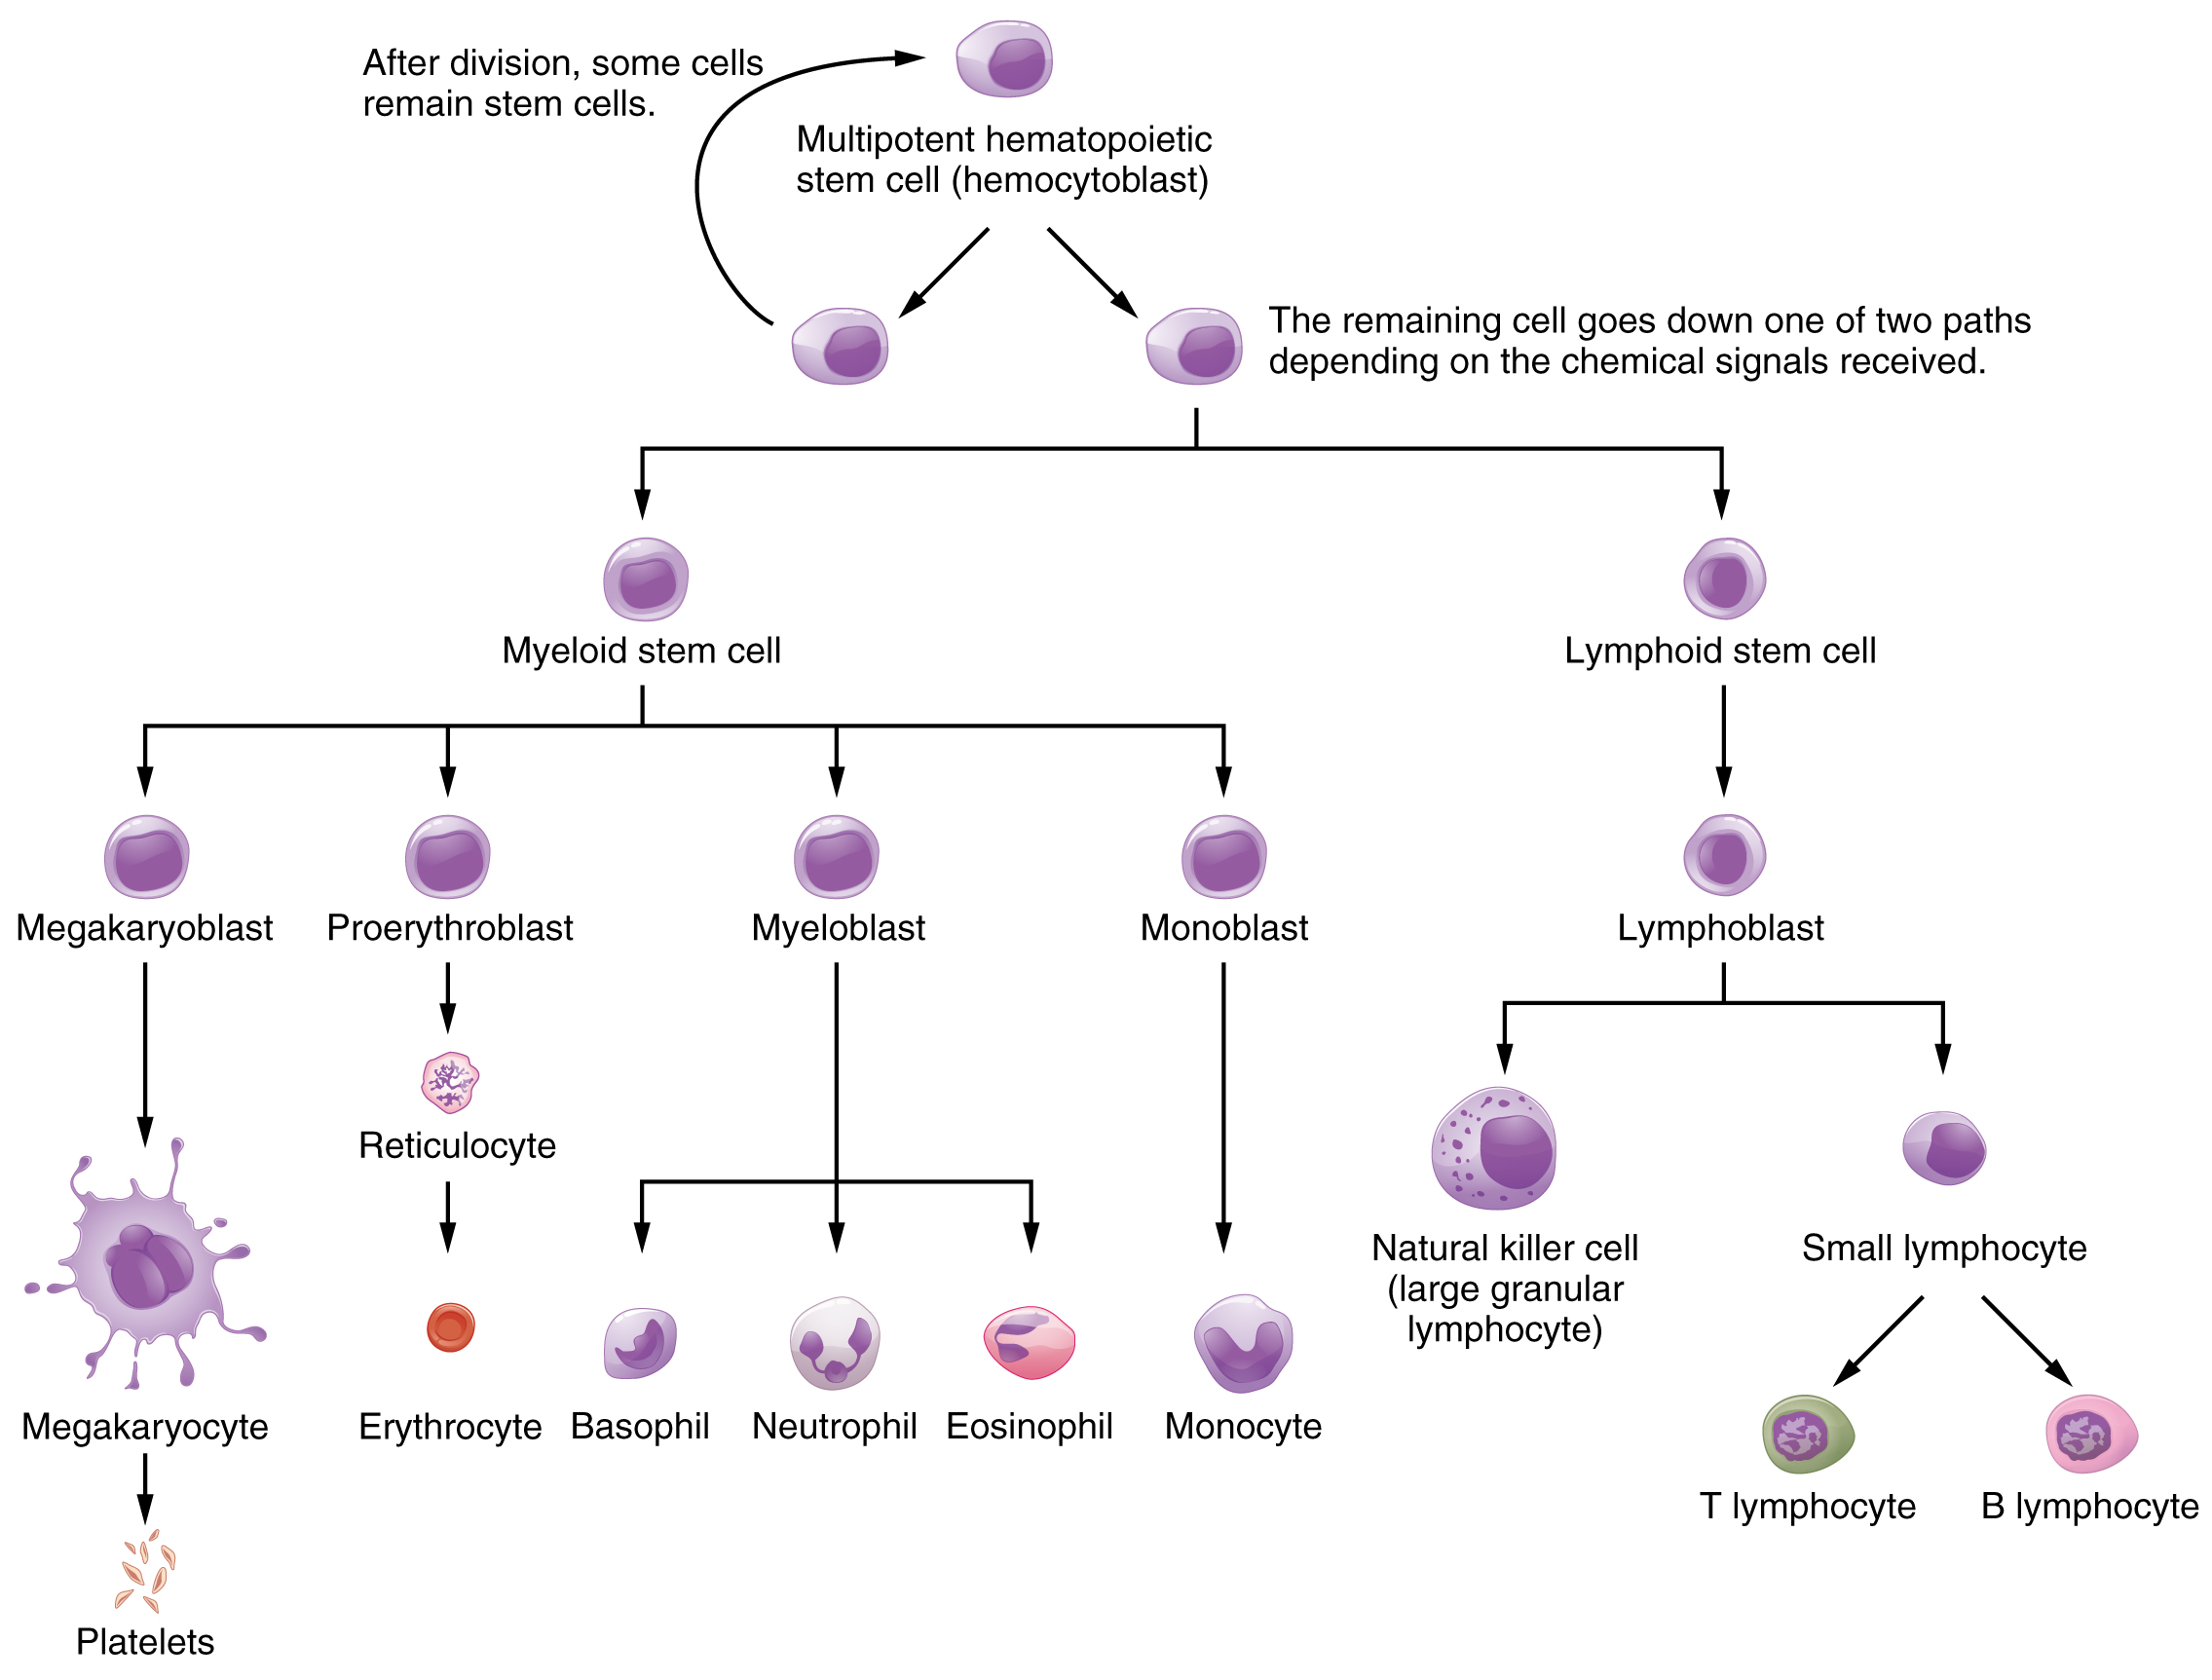 This flowchart shows the pathways in which a multipotent hemotopoietic stem cell differentiates into the different cell types found in blood. Image description available.